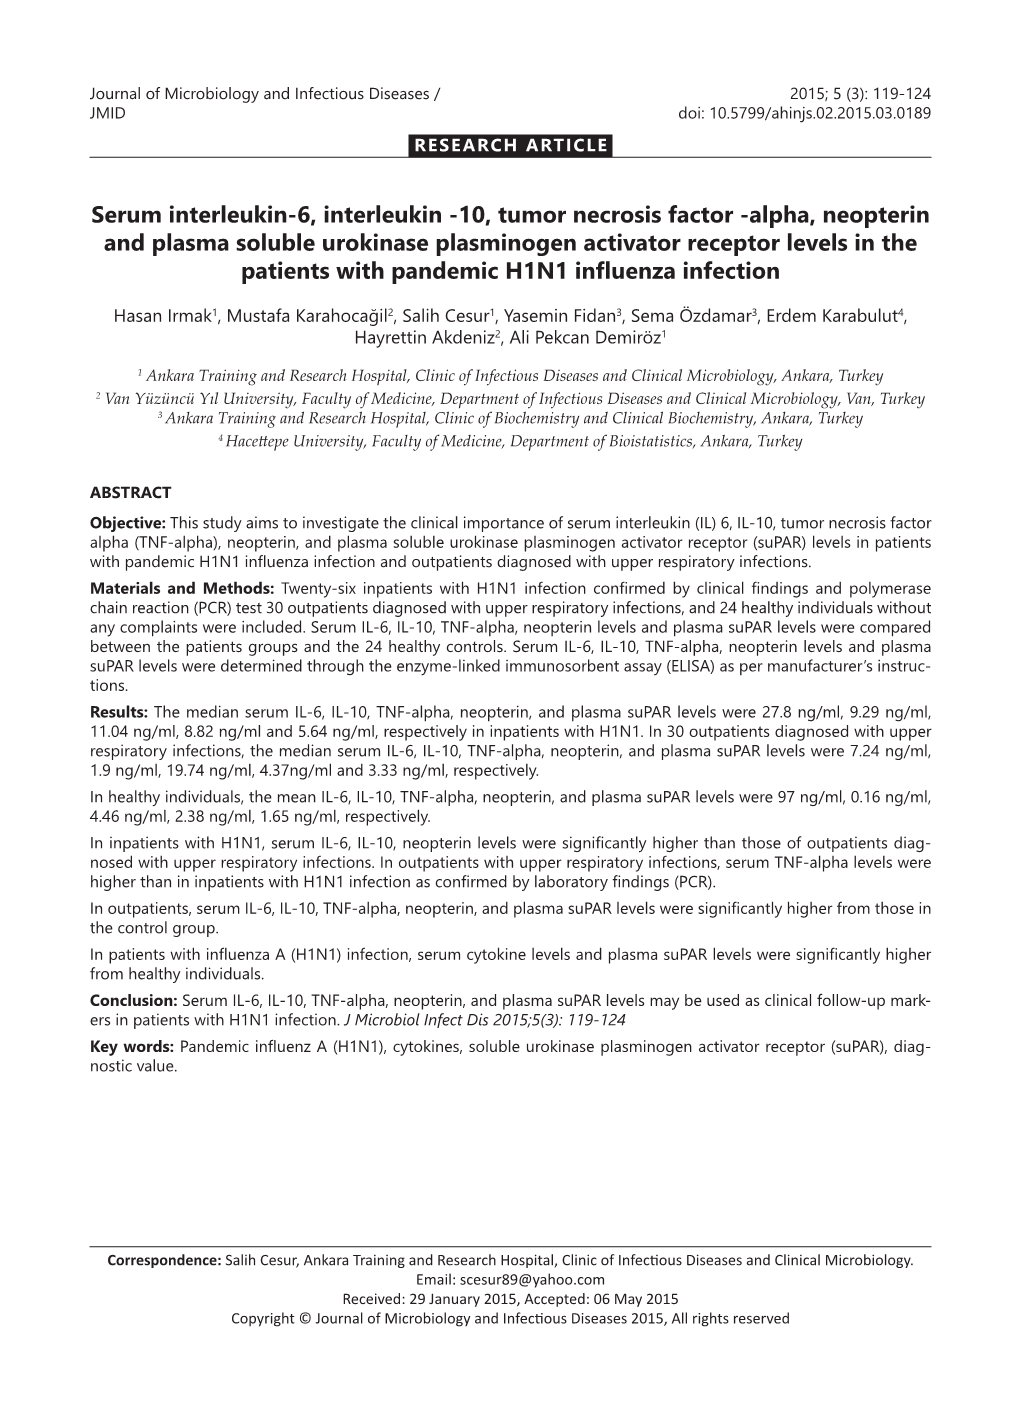 10, Tumor Necrosis Factor -Alpha, Neopterin and Plasma Soluble Urokinase Plasminogen Activator Receptor Levels in the Patients with Pandemic H1N1 Influenza Infection